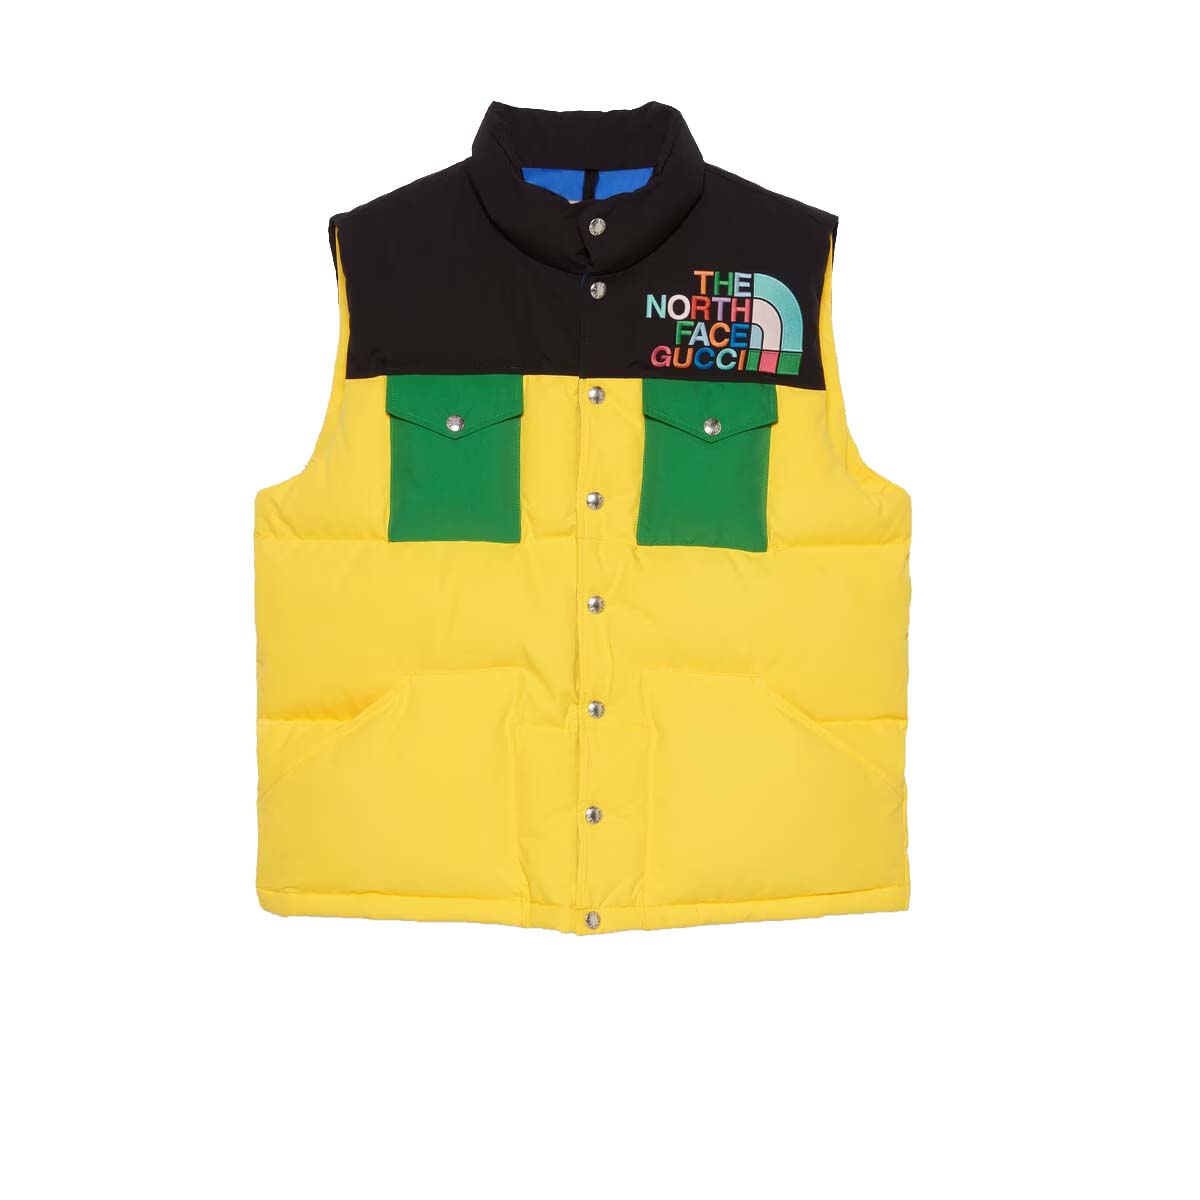 Gucci x The North Face Down Vest Yellow/Black/Green - FW22 - US